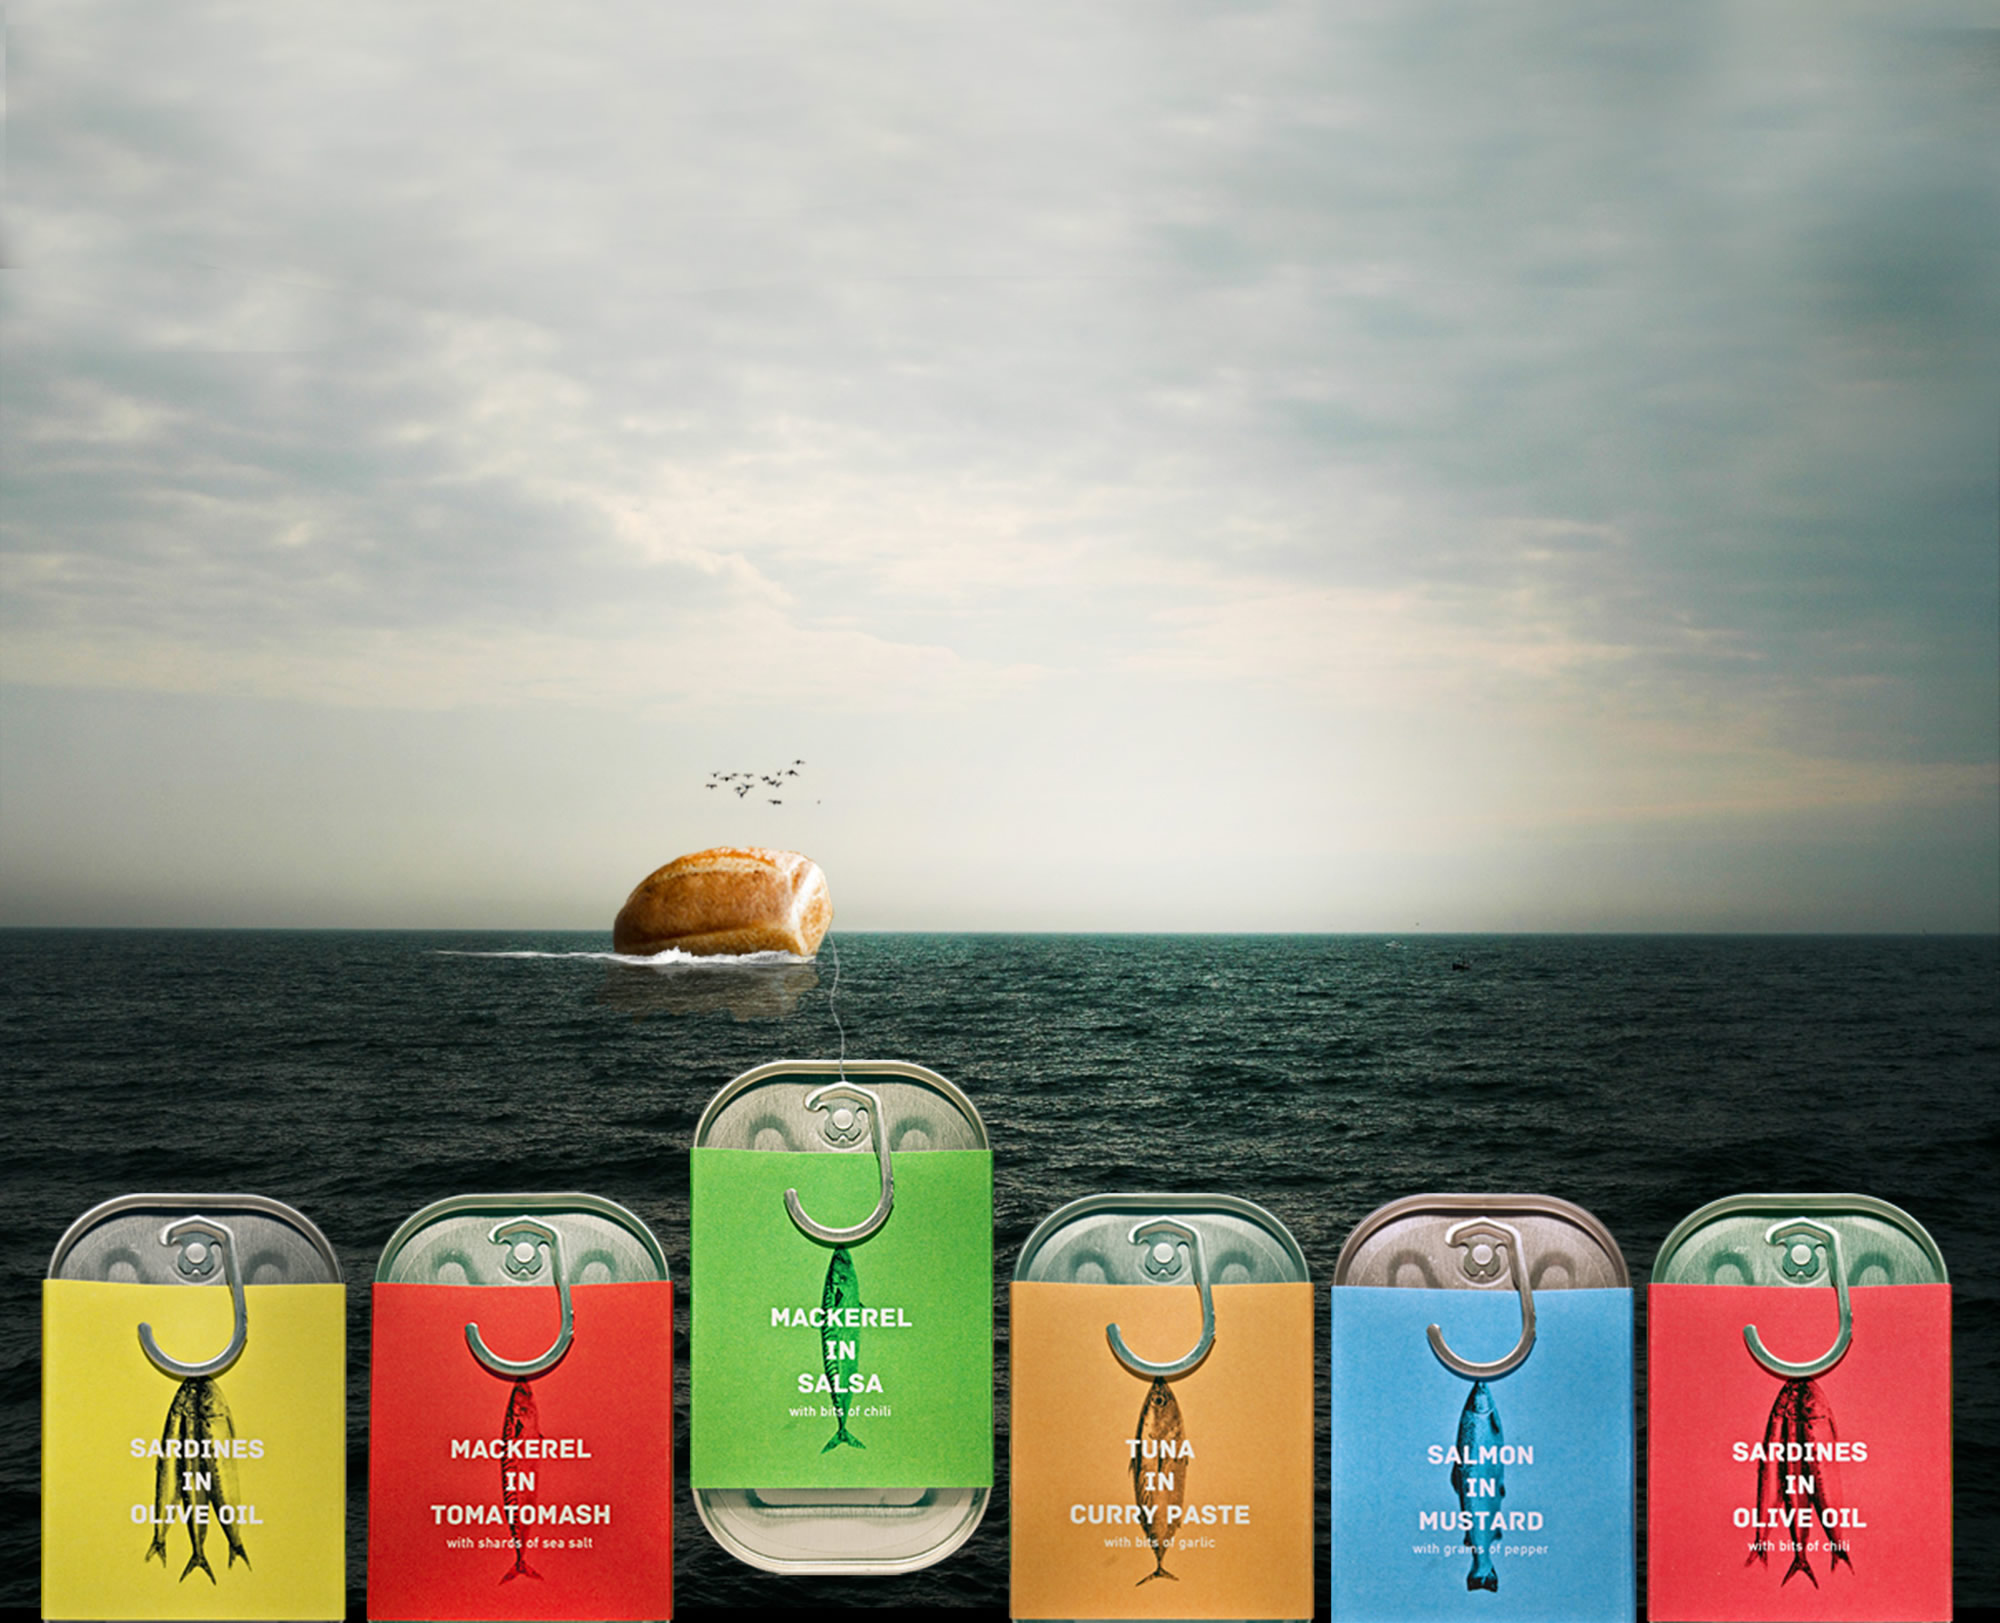 Fisj Canned Fish Packaging Concept by Simen Wahlqvist